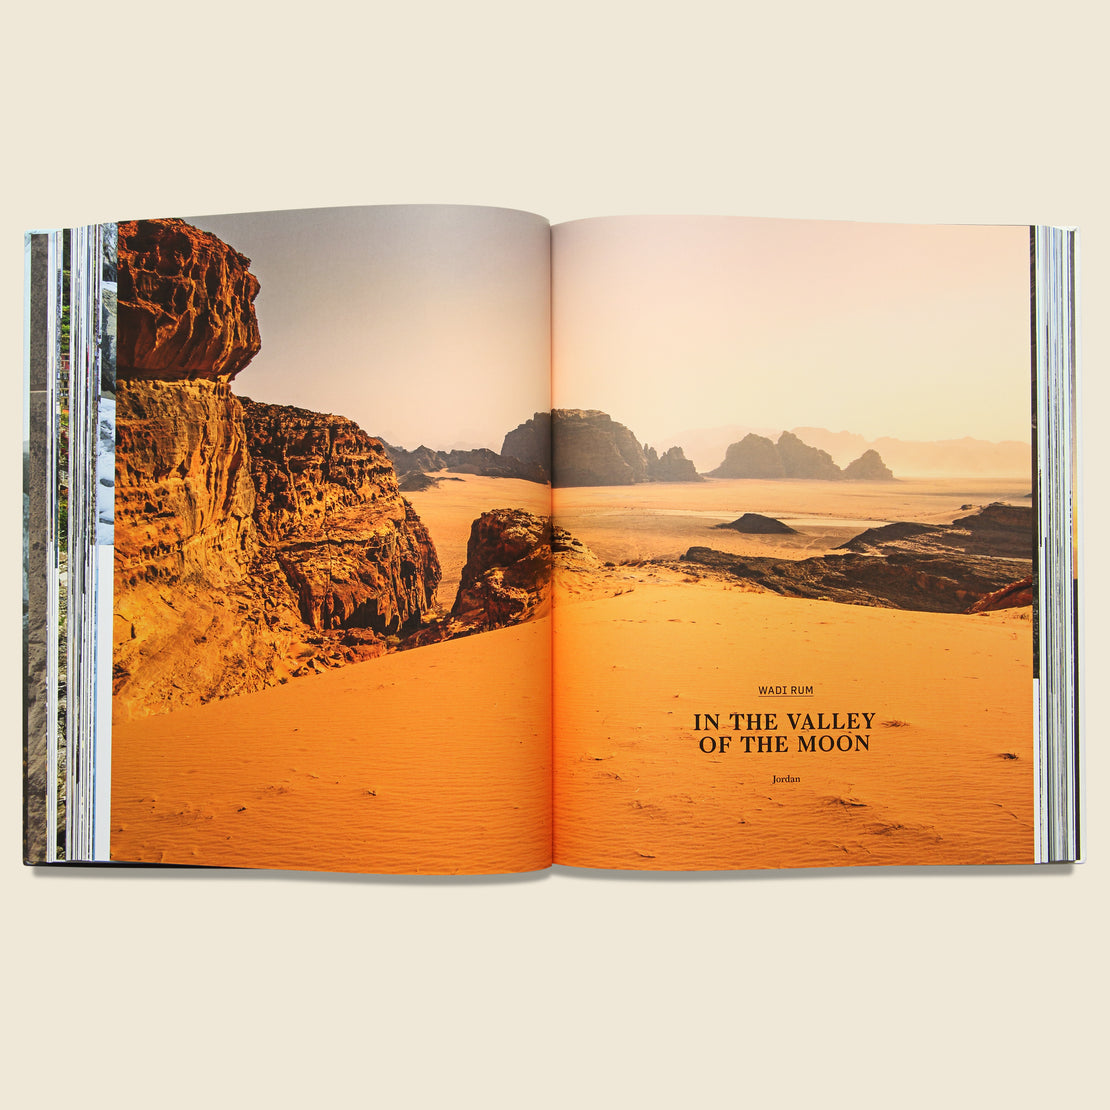 Wanderlust: Hiking on Legendary Trails - Bookstore - STAG Provisions - Home - Library - Book